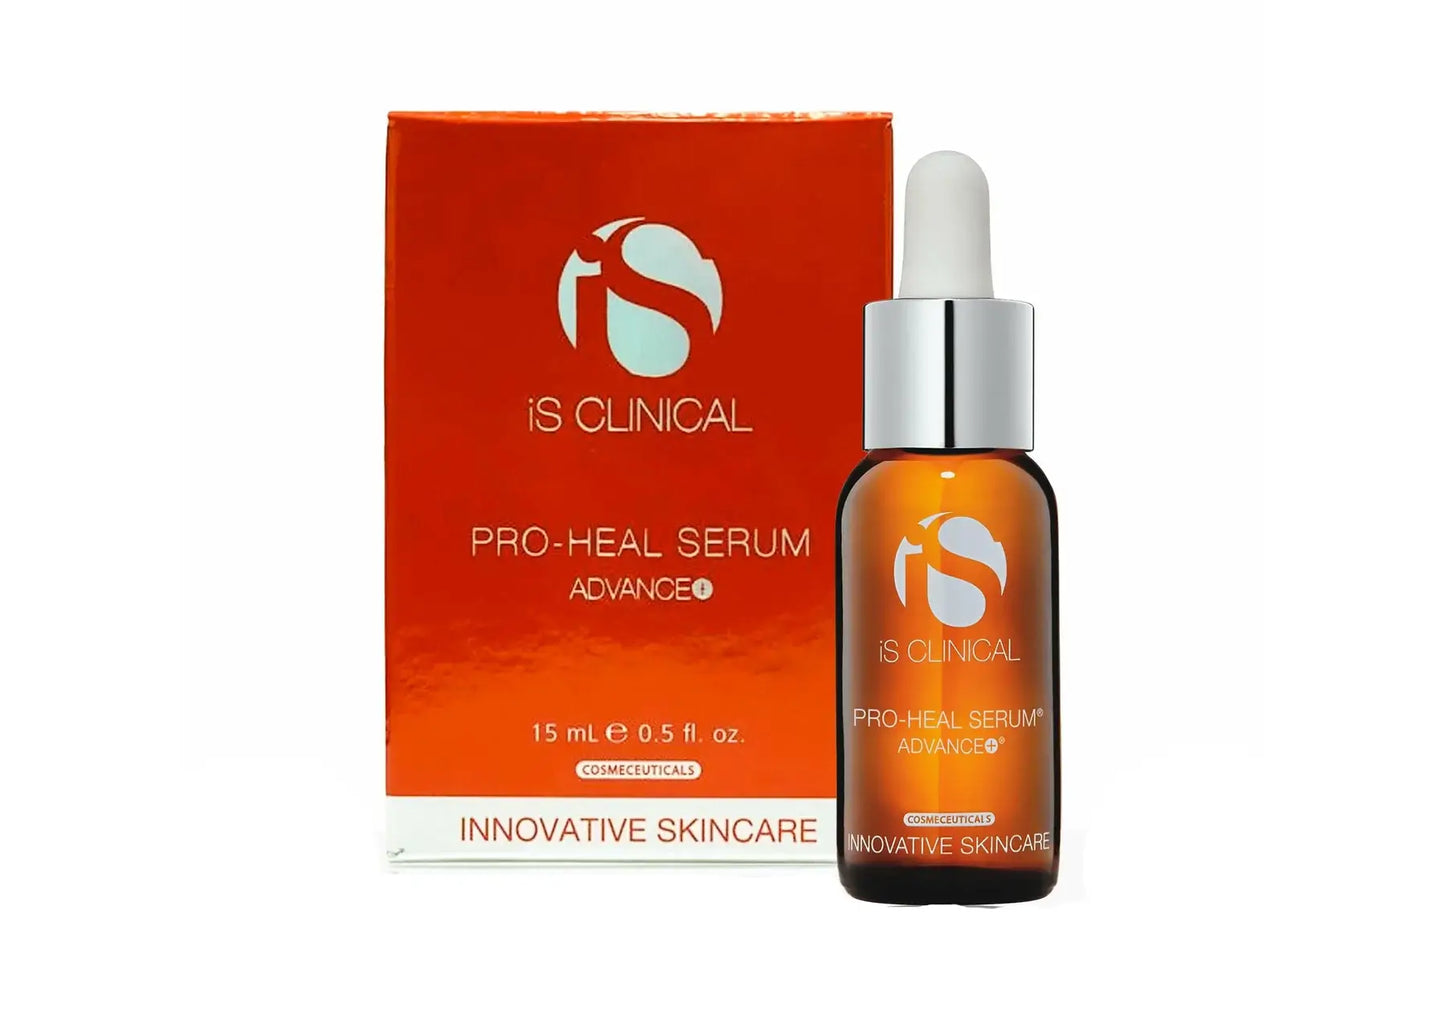 IS Clinical serum